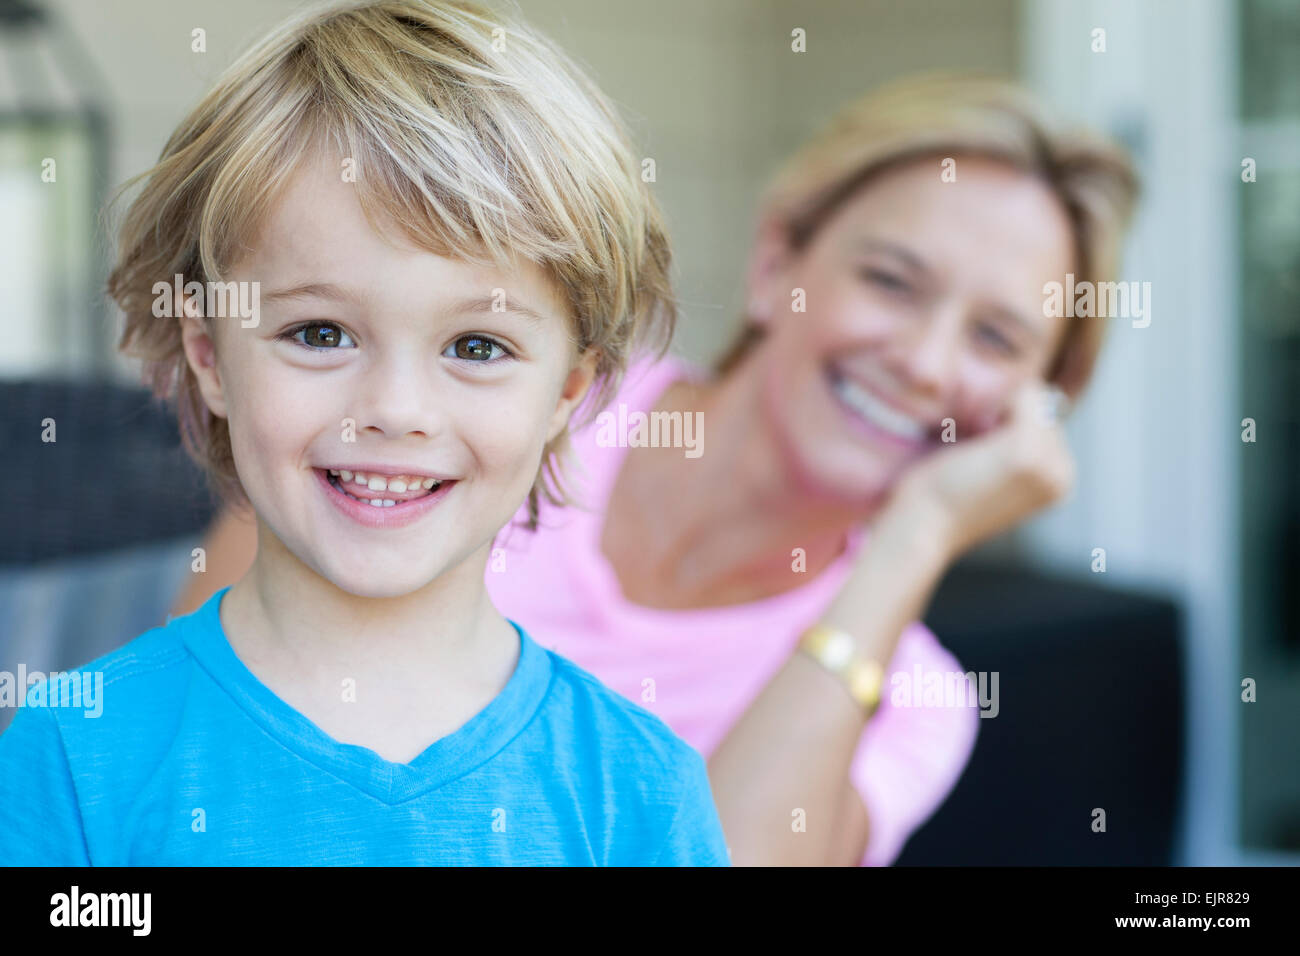 Woman smiling with mother Banque D'Images